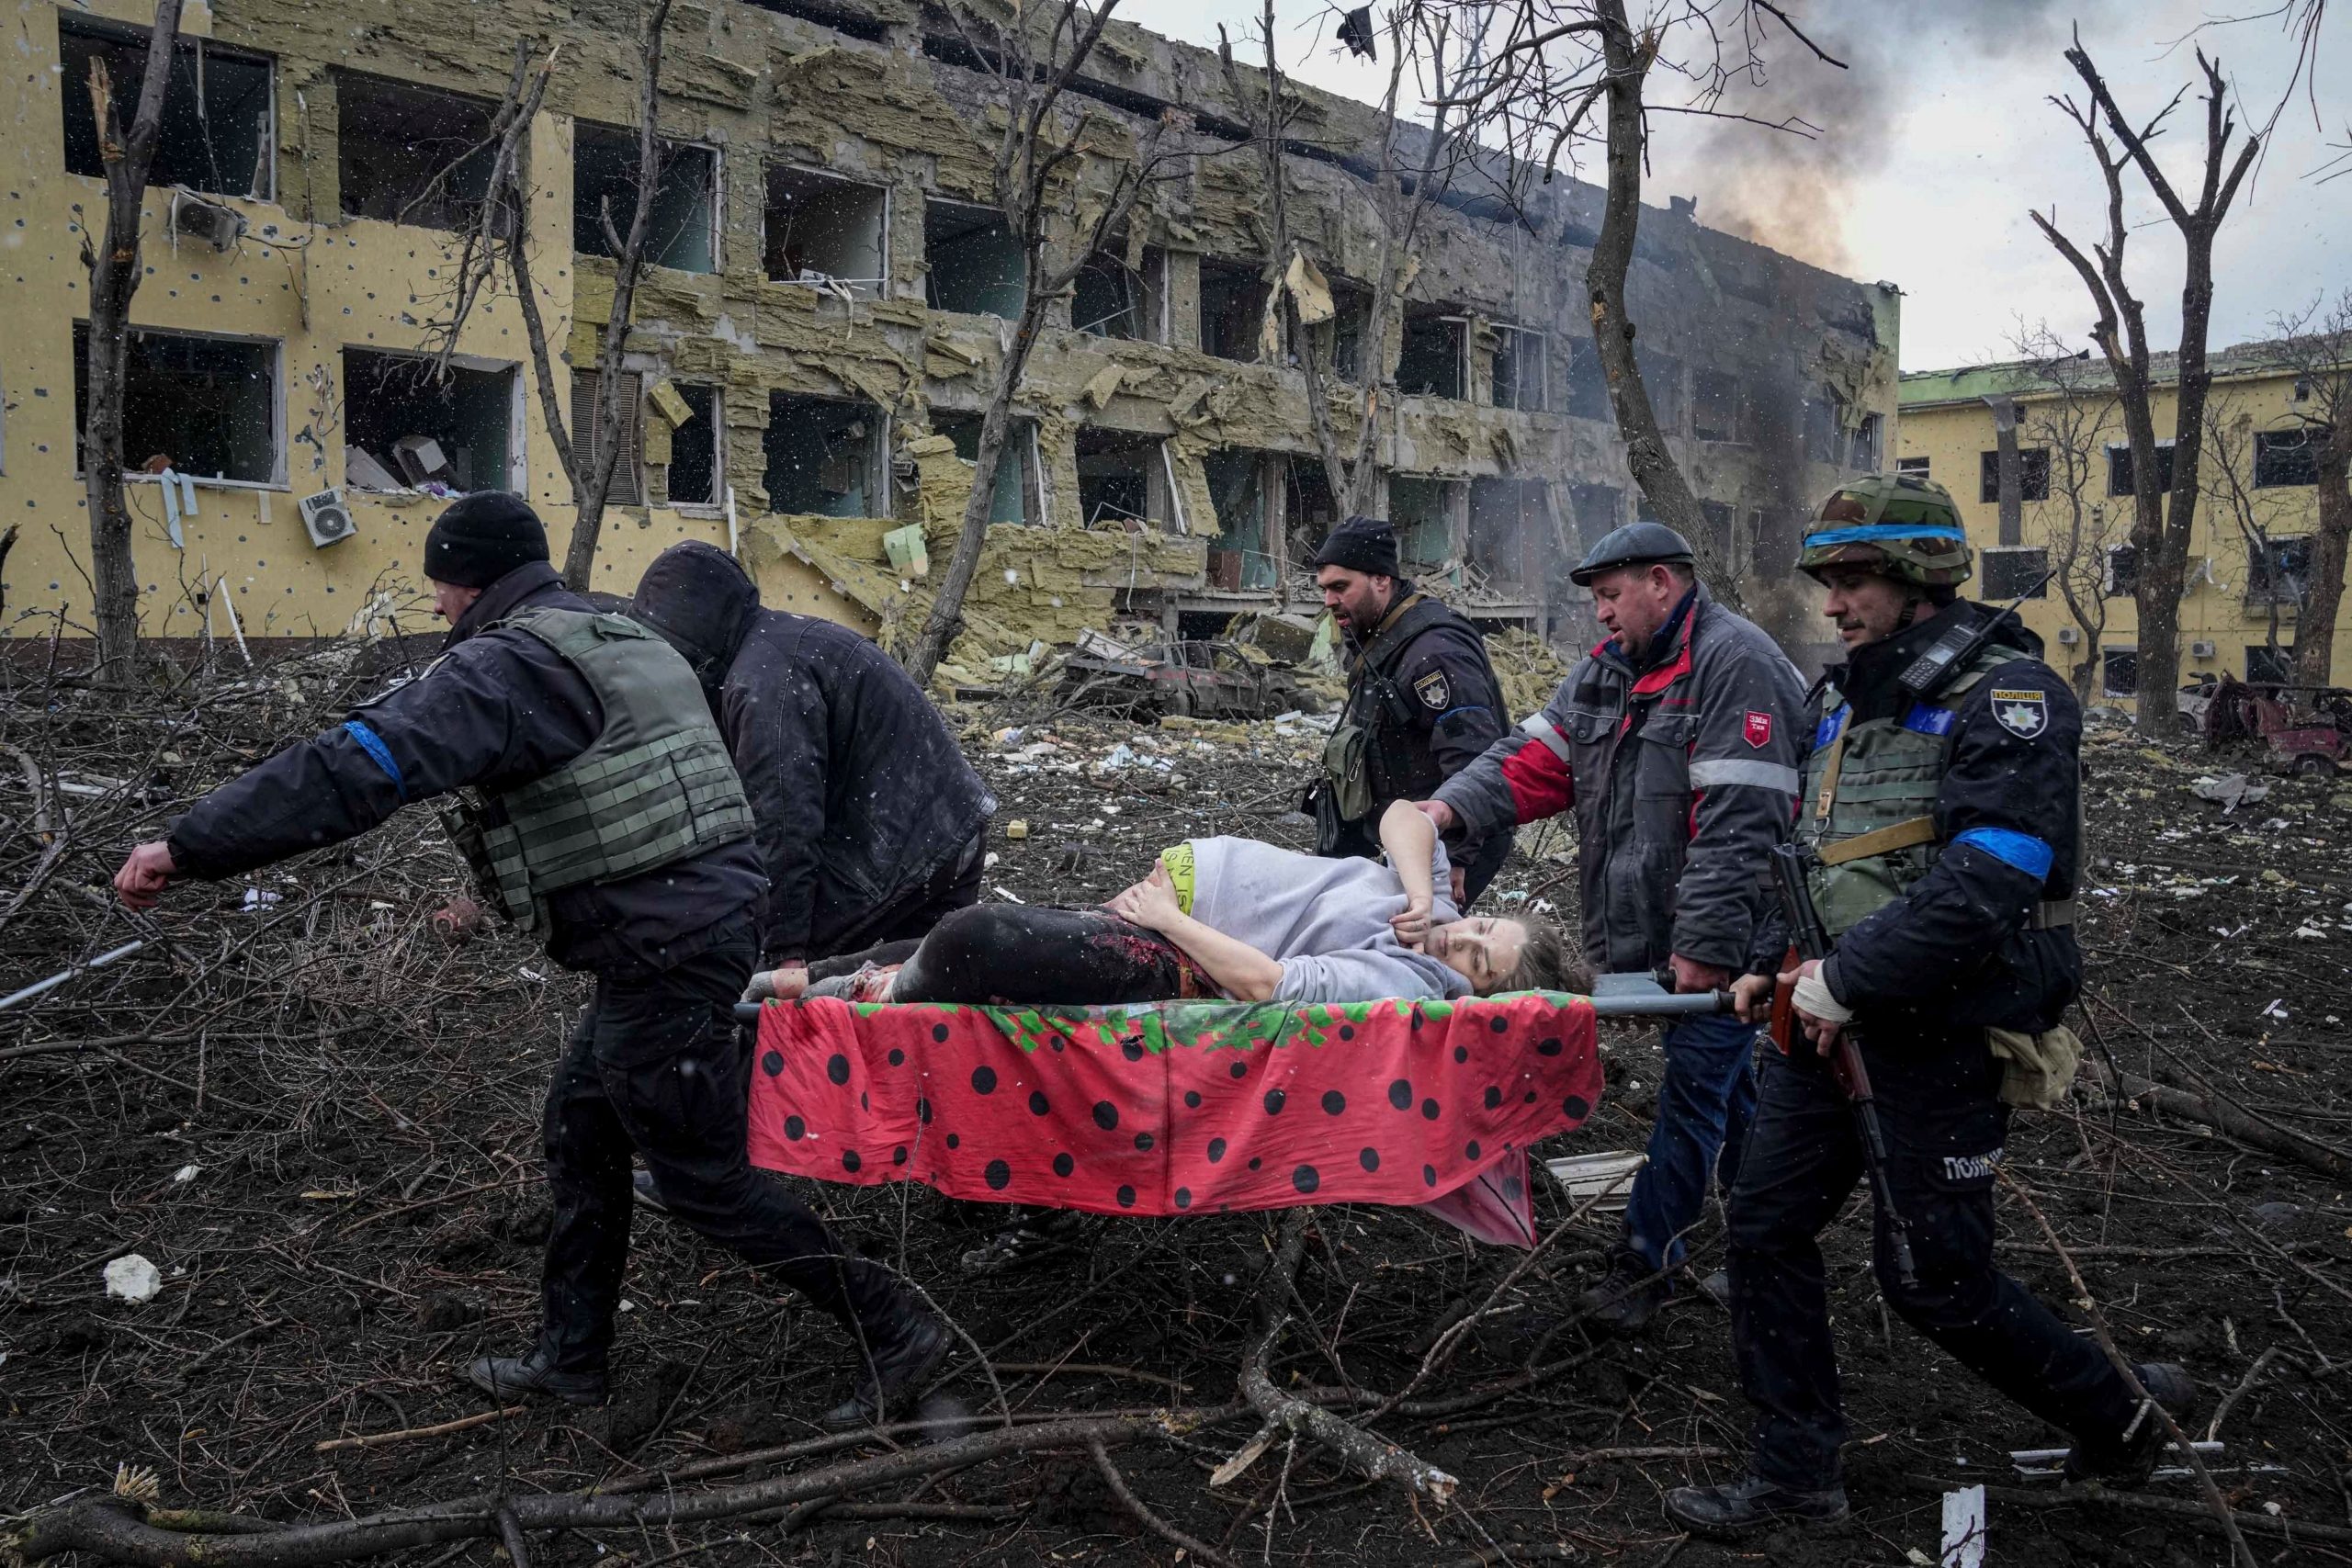 At least 5,000 killed in Mariupol since invasion: Ukraine official